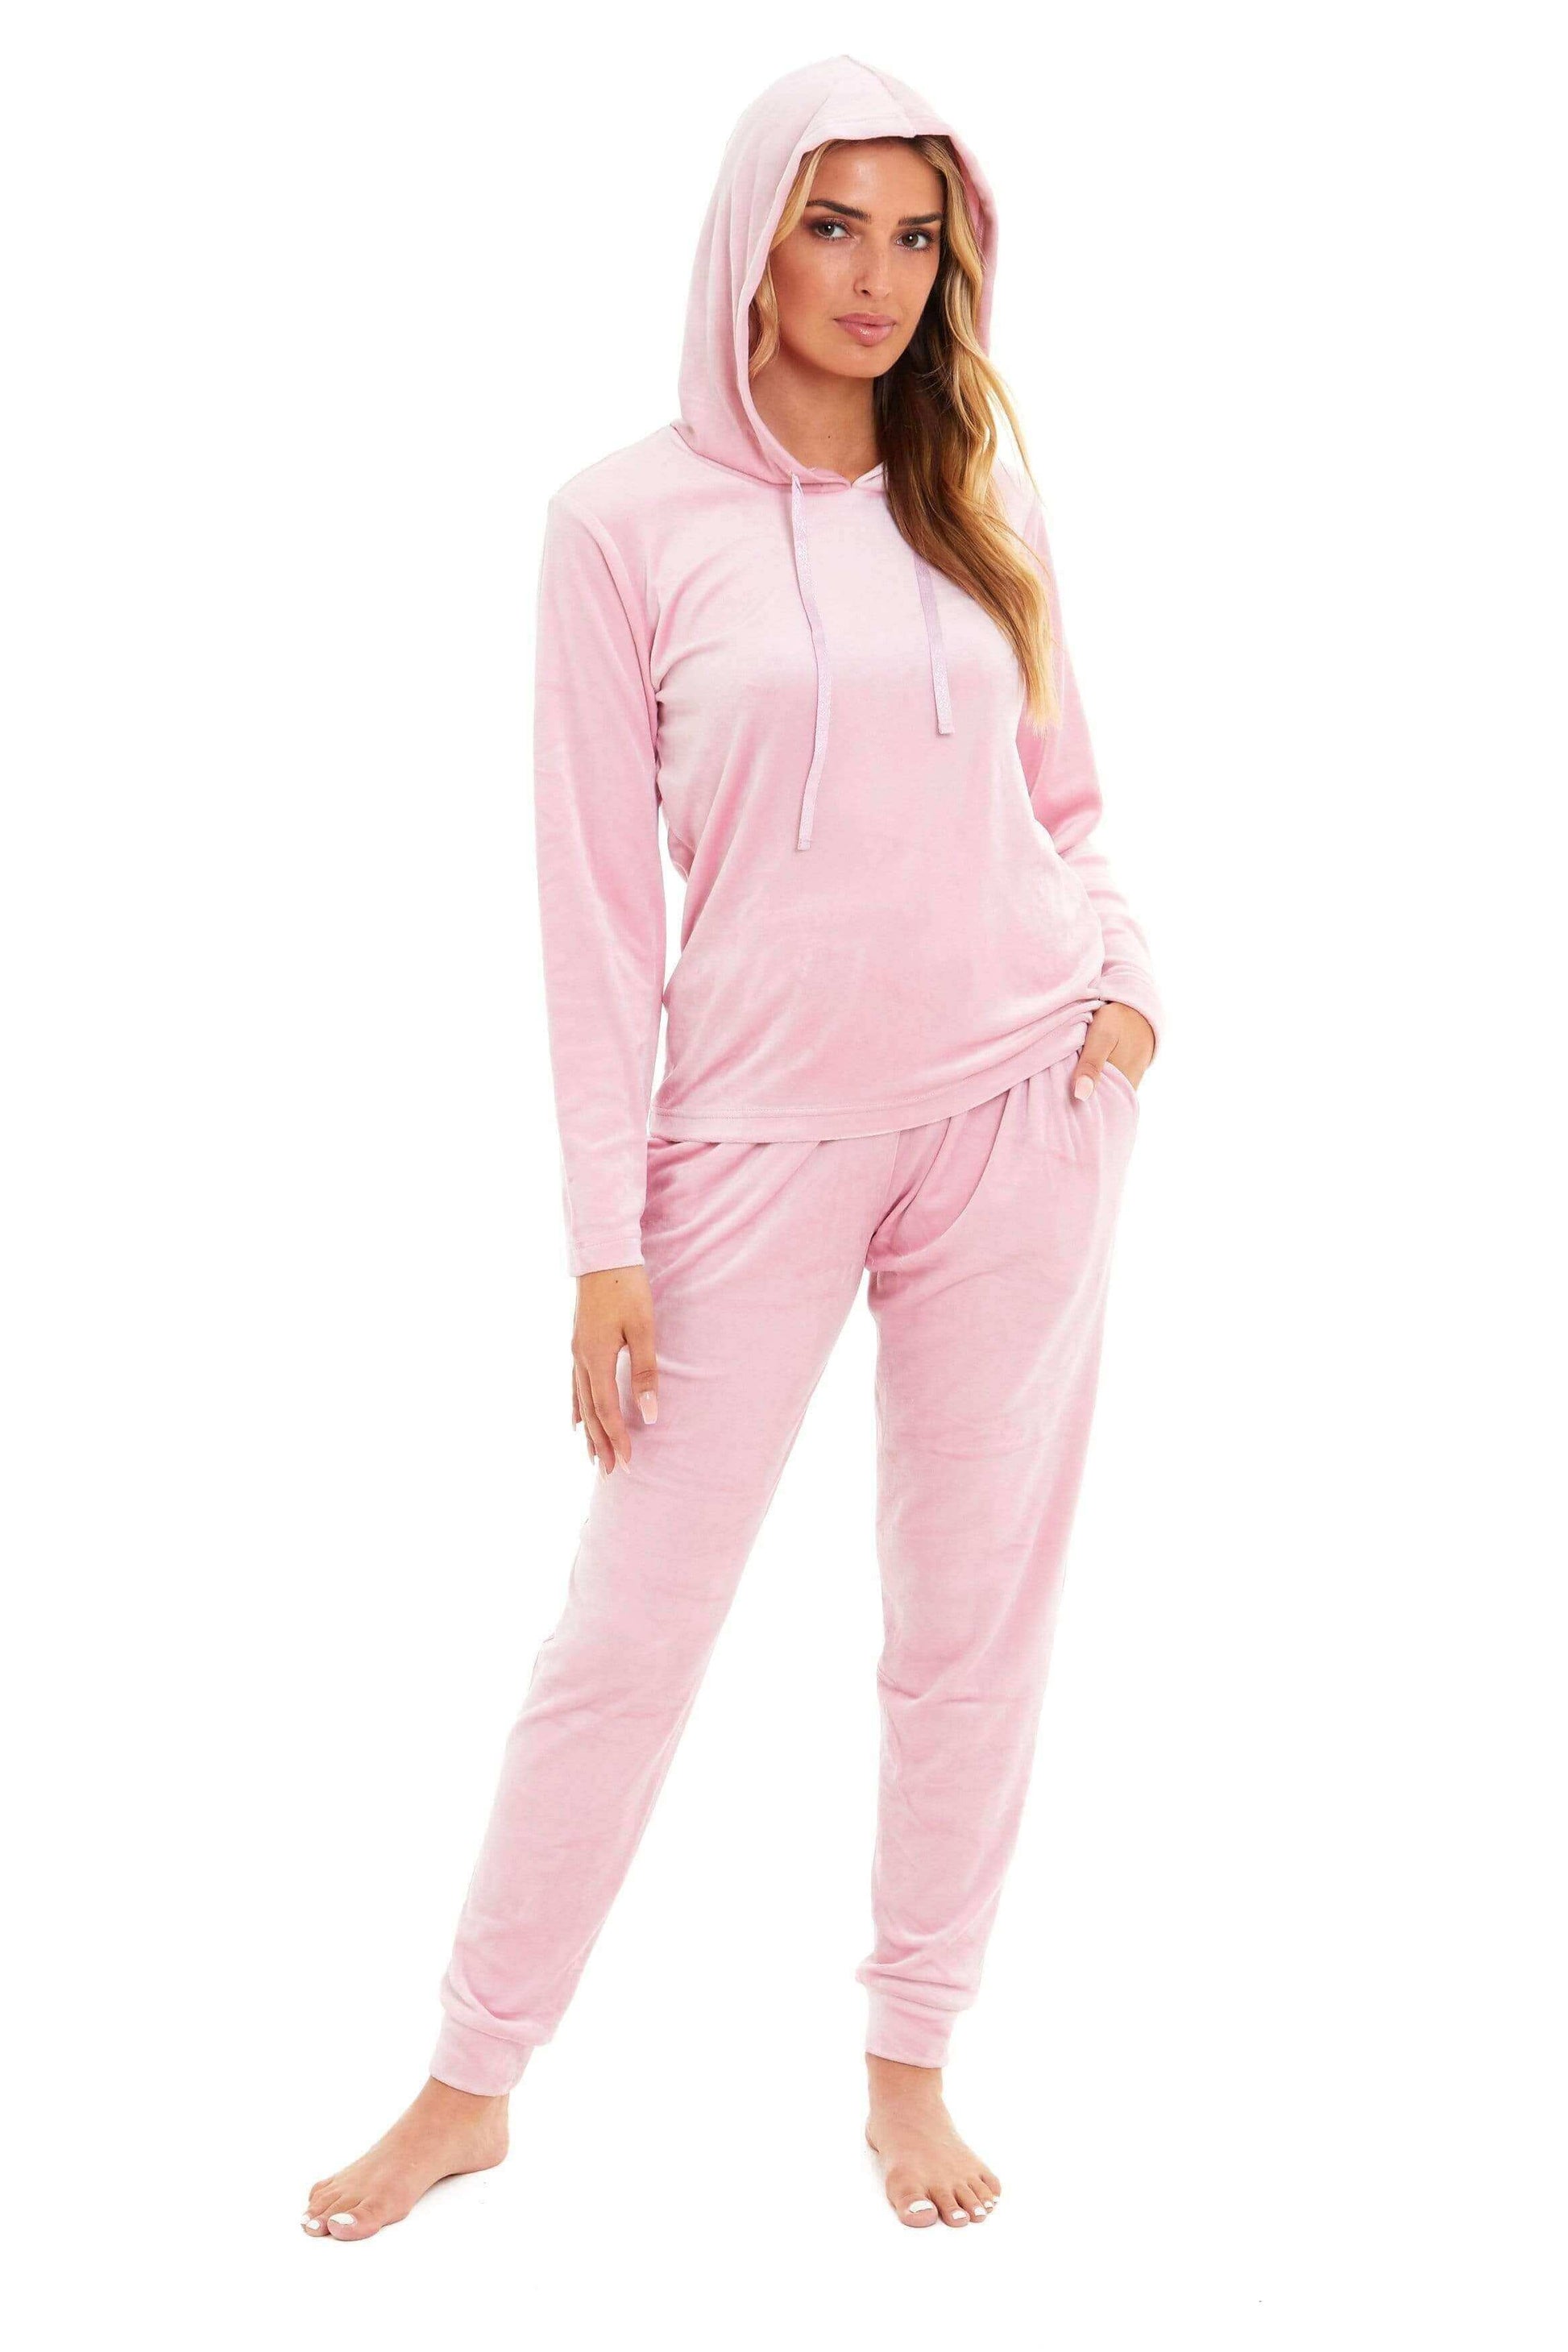 Women's Super Soft Velour Hooded Pyjama Set Comfortable Fleece Loungewear for Lounging Sleeping Pajama Parties in Pink Grey by Daisy Dreamer. Buy now for £20.00. A Pyjamas by Daisy Dreamer. 12-14,16-18,20-22,8-10,_Hi_chtgptapp_optimised_this_description-g